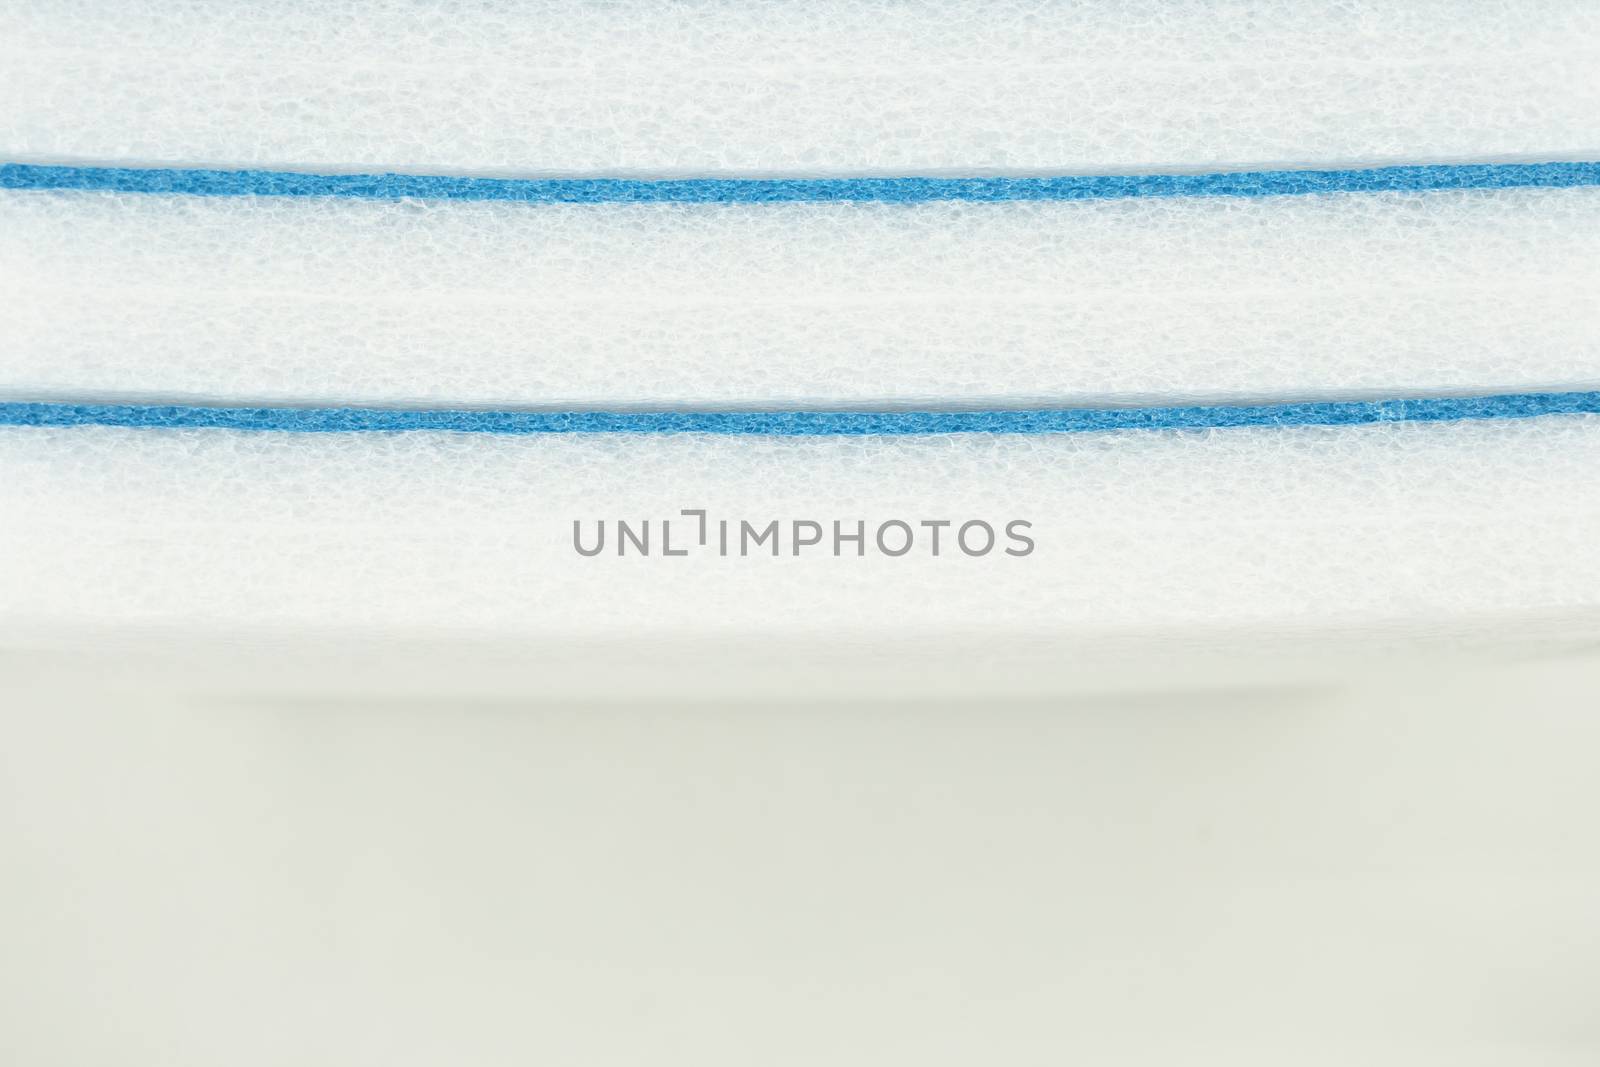 Blue and white solid sponge prevent from bumping put as abstract background texture.